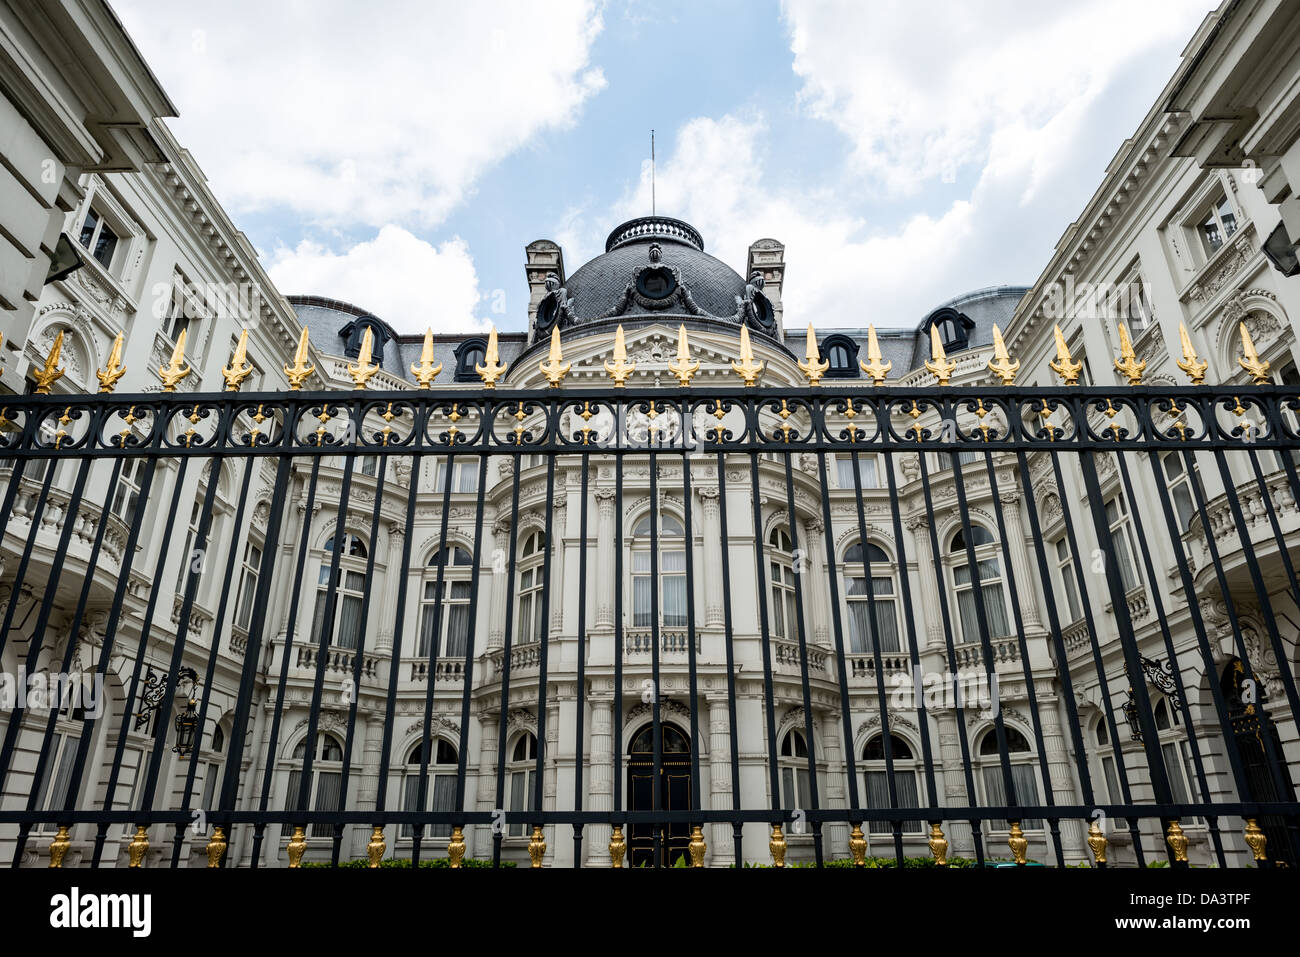 BRUSSELS, Belgium - A black and gold fence protects a building in the royal quarter of Brussels, Belgium. Stock Photo